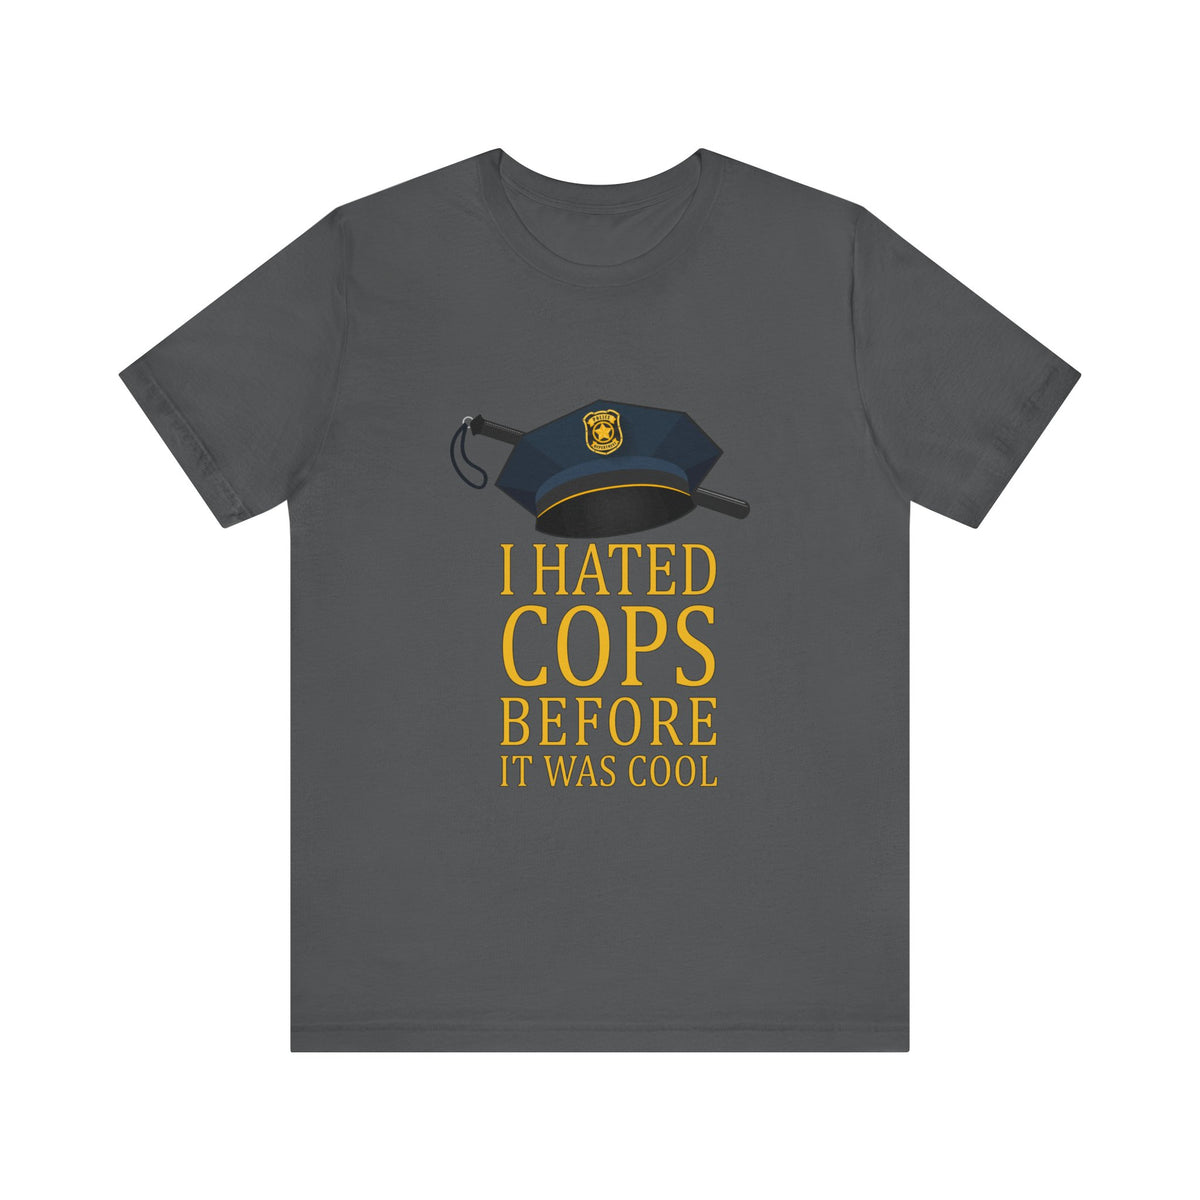 I Hated Cops Before It Was Cool - Men's T-Shirt